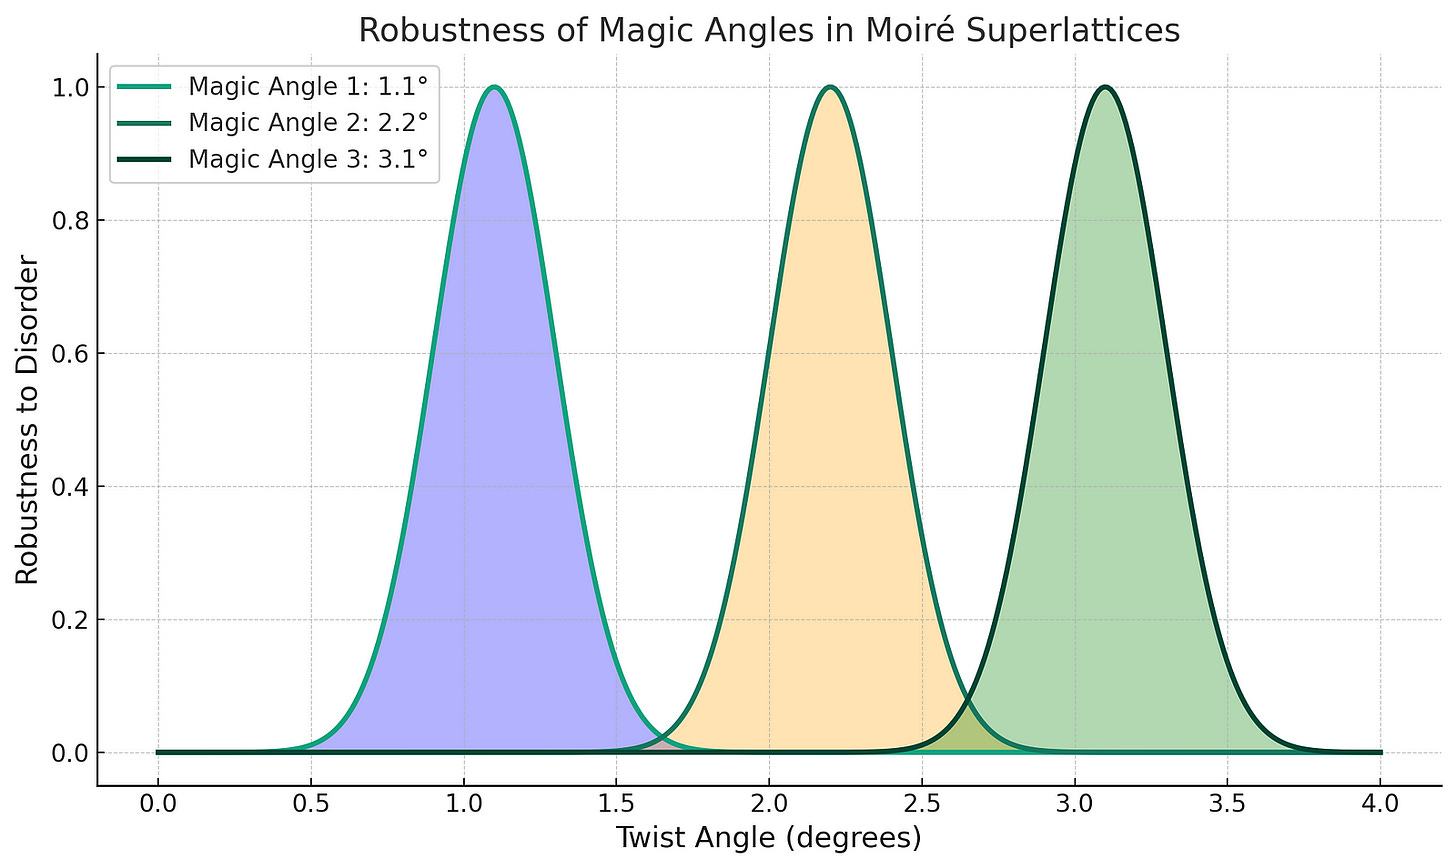 A colorful graph showing the robustness of magic angles in moiré superlattices. Three peaks represent different magic angles, with the highest peak indicating the first magic angle’s superior robustness to disorder. The background colors of blue, orange, and green correspond to the robustness levels of the first, second, and third magic angles, respectively.